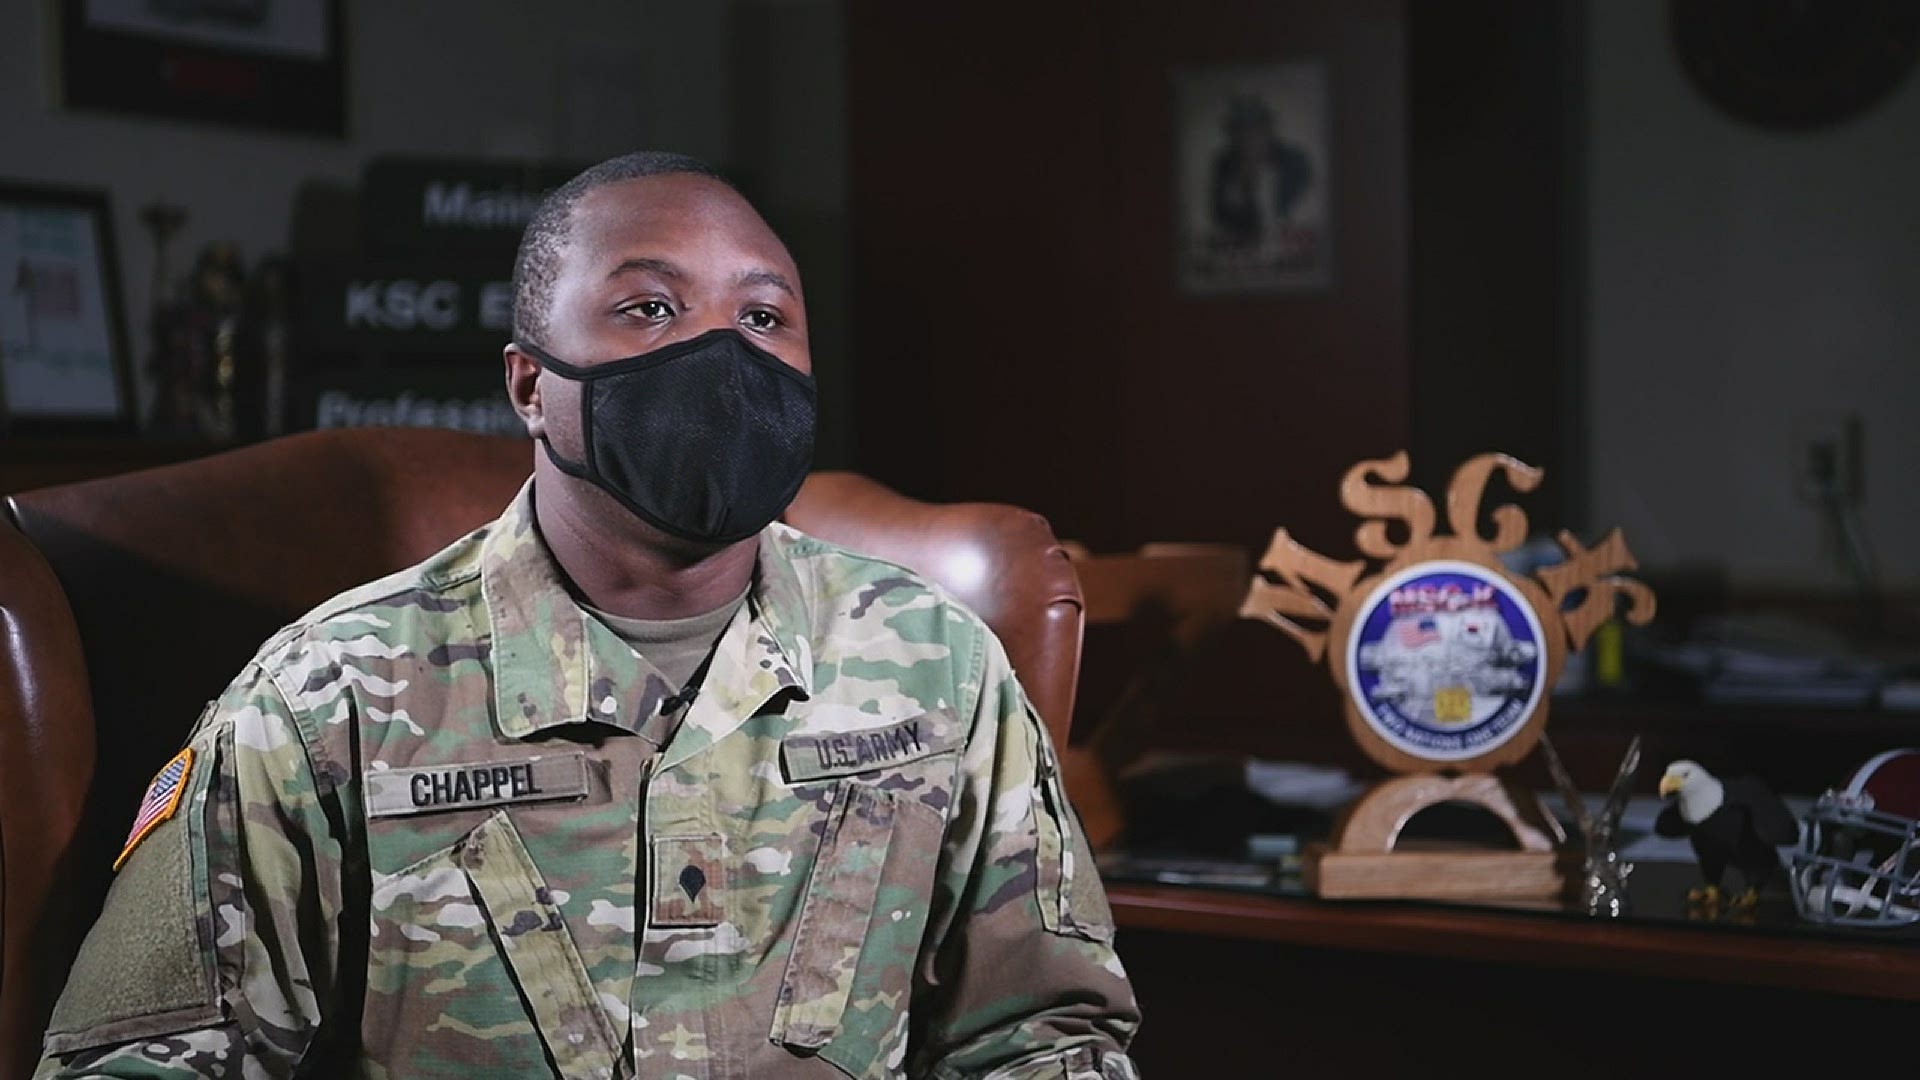 SPC De'ontae Chappel, the first known service member diagnosed with COVID-19, tells his story after a full recovery.